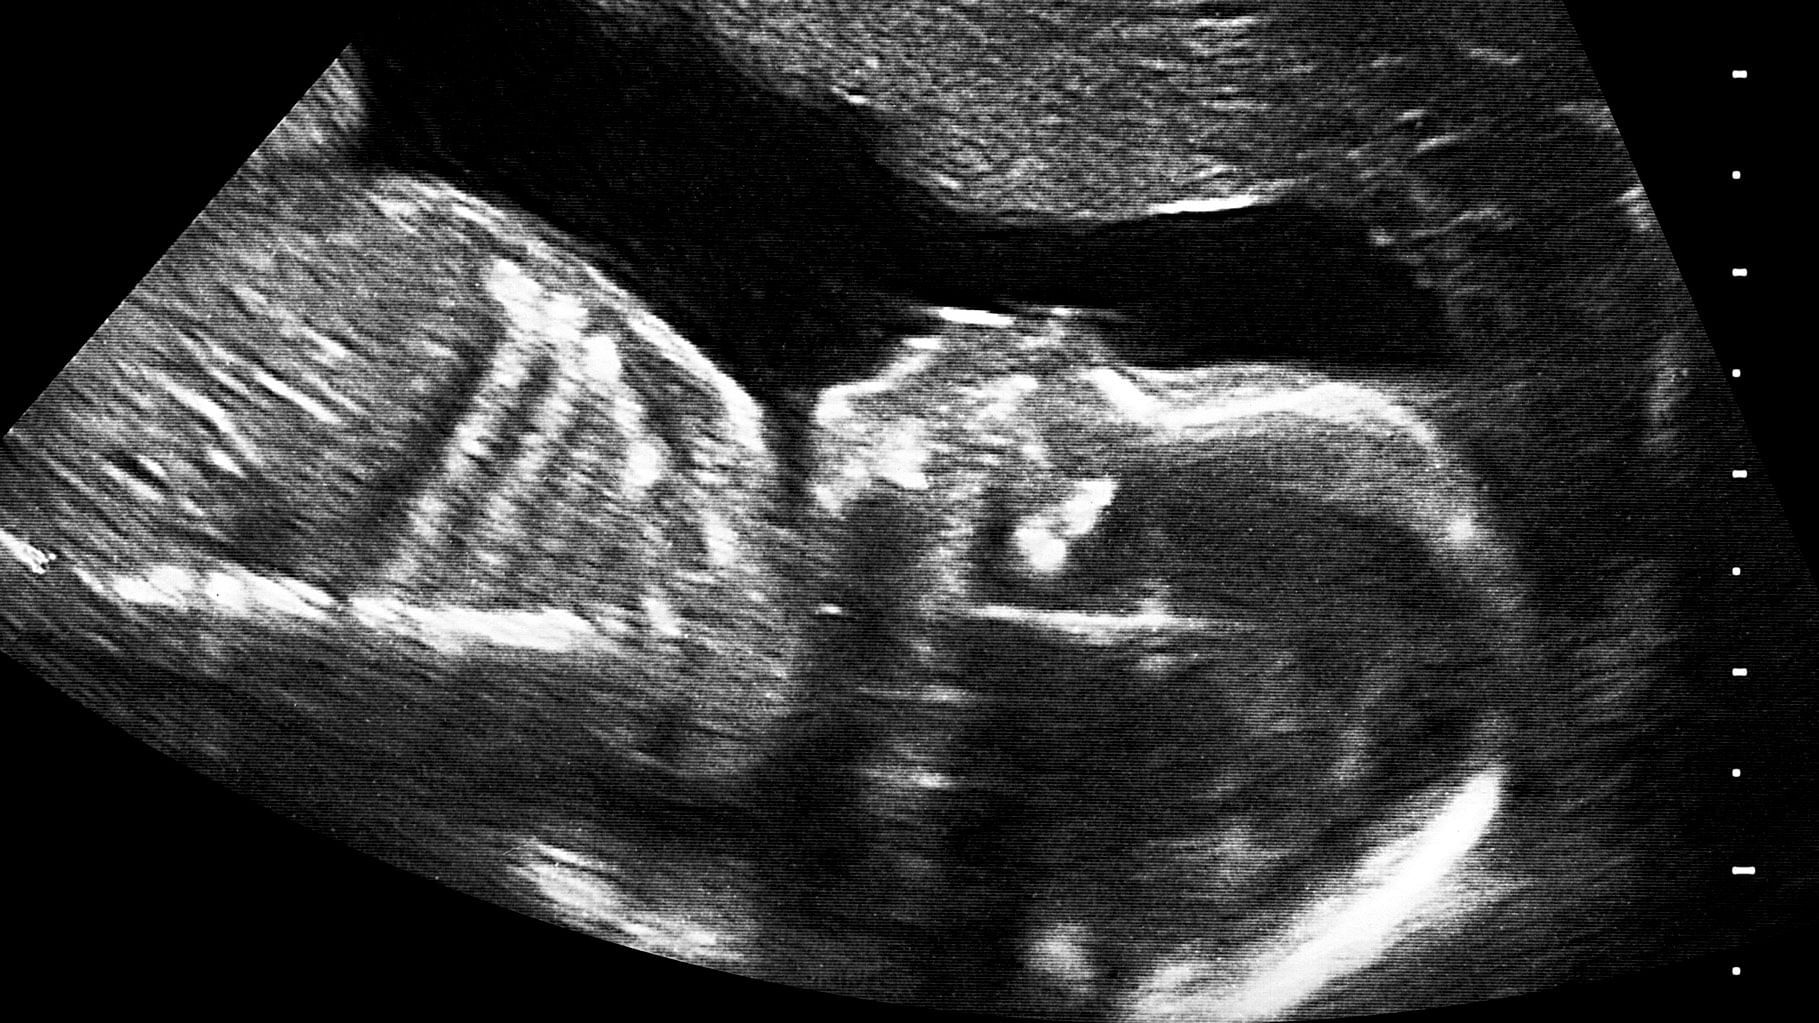 Photo of a foetus used for representational purposes.